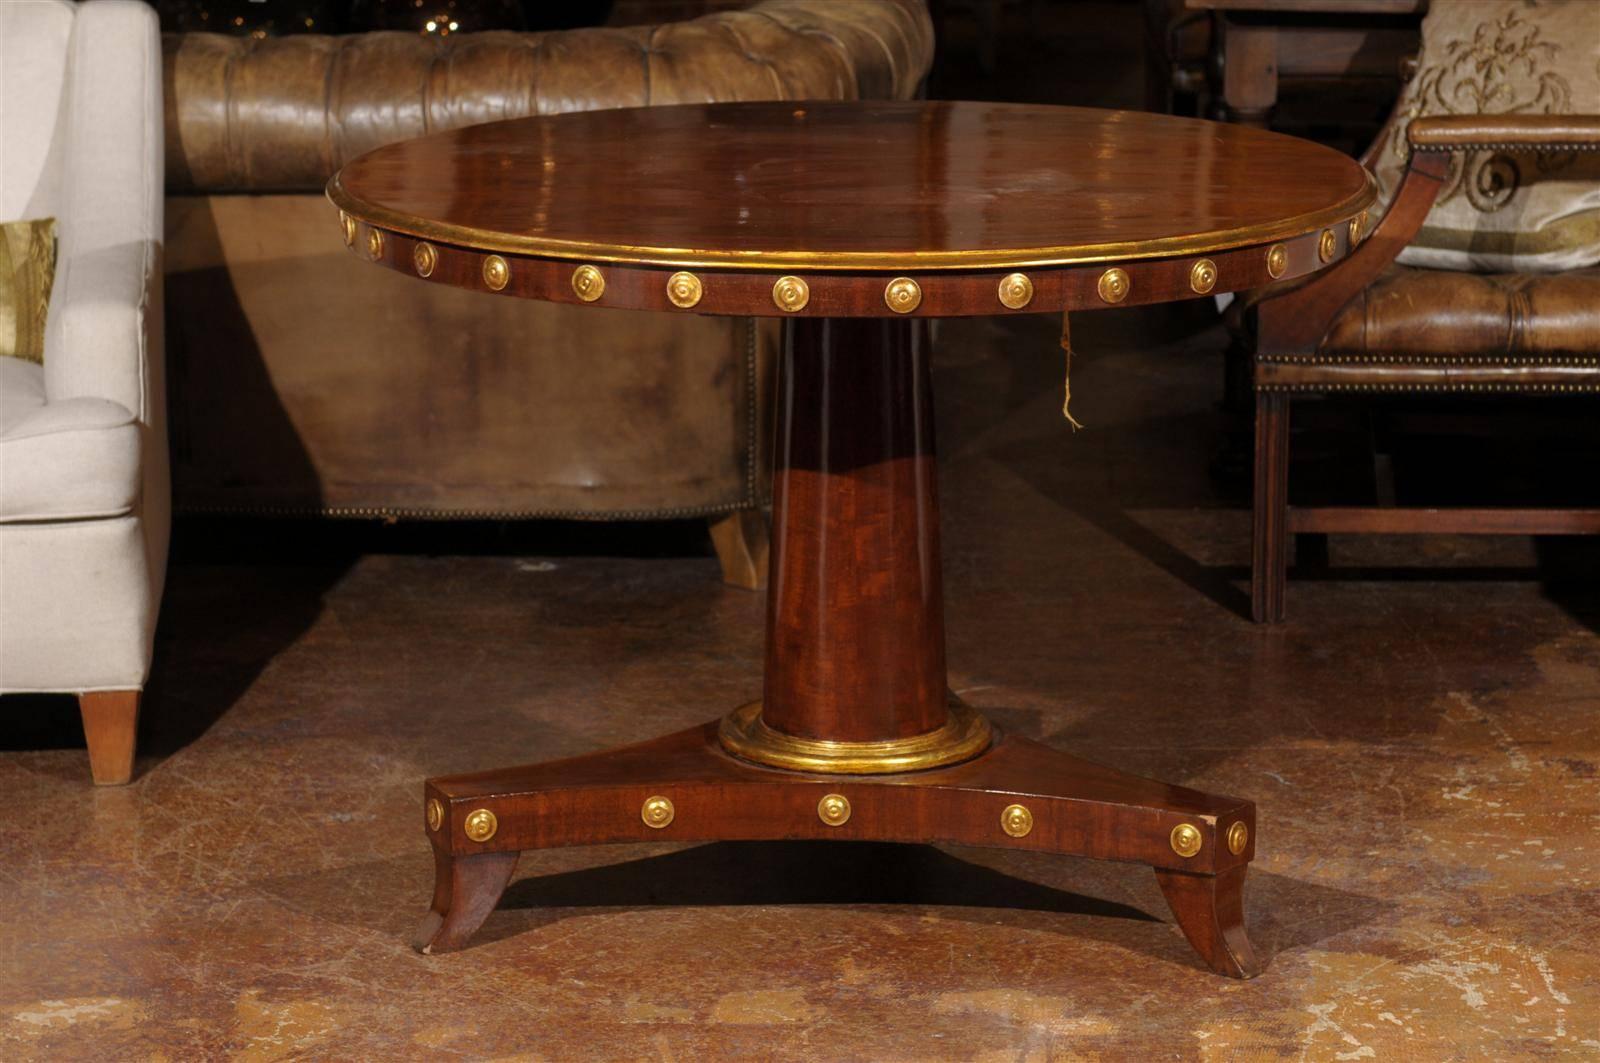 Early 19th century mahogany Empire period tilt-top pedestal center table, the circular top raised on a singular pedestal and ending in a triple base and splayed feet, with gilt accents throughout.